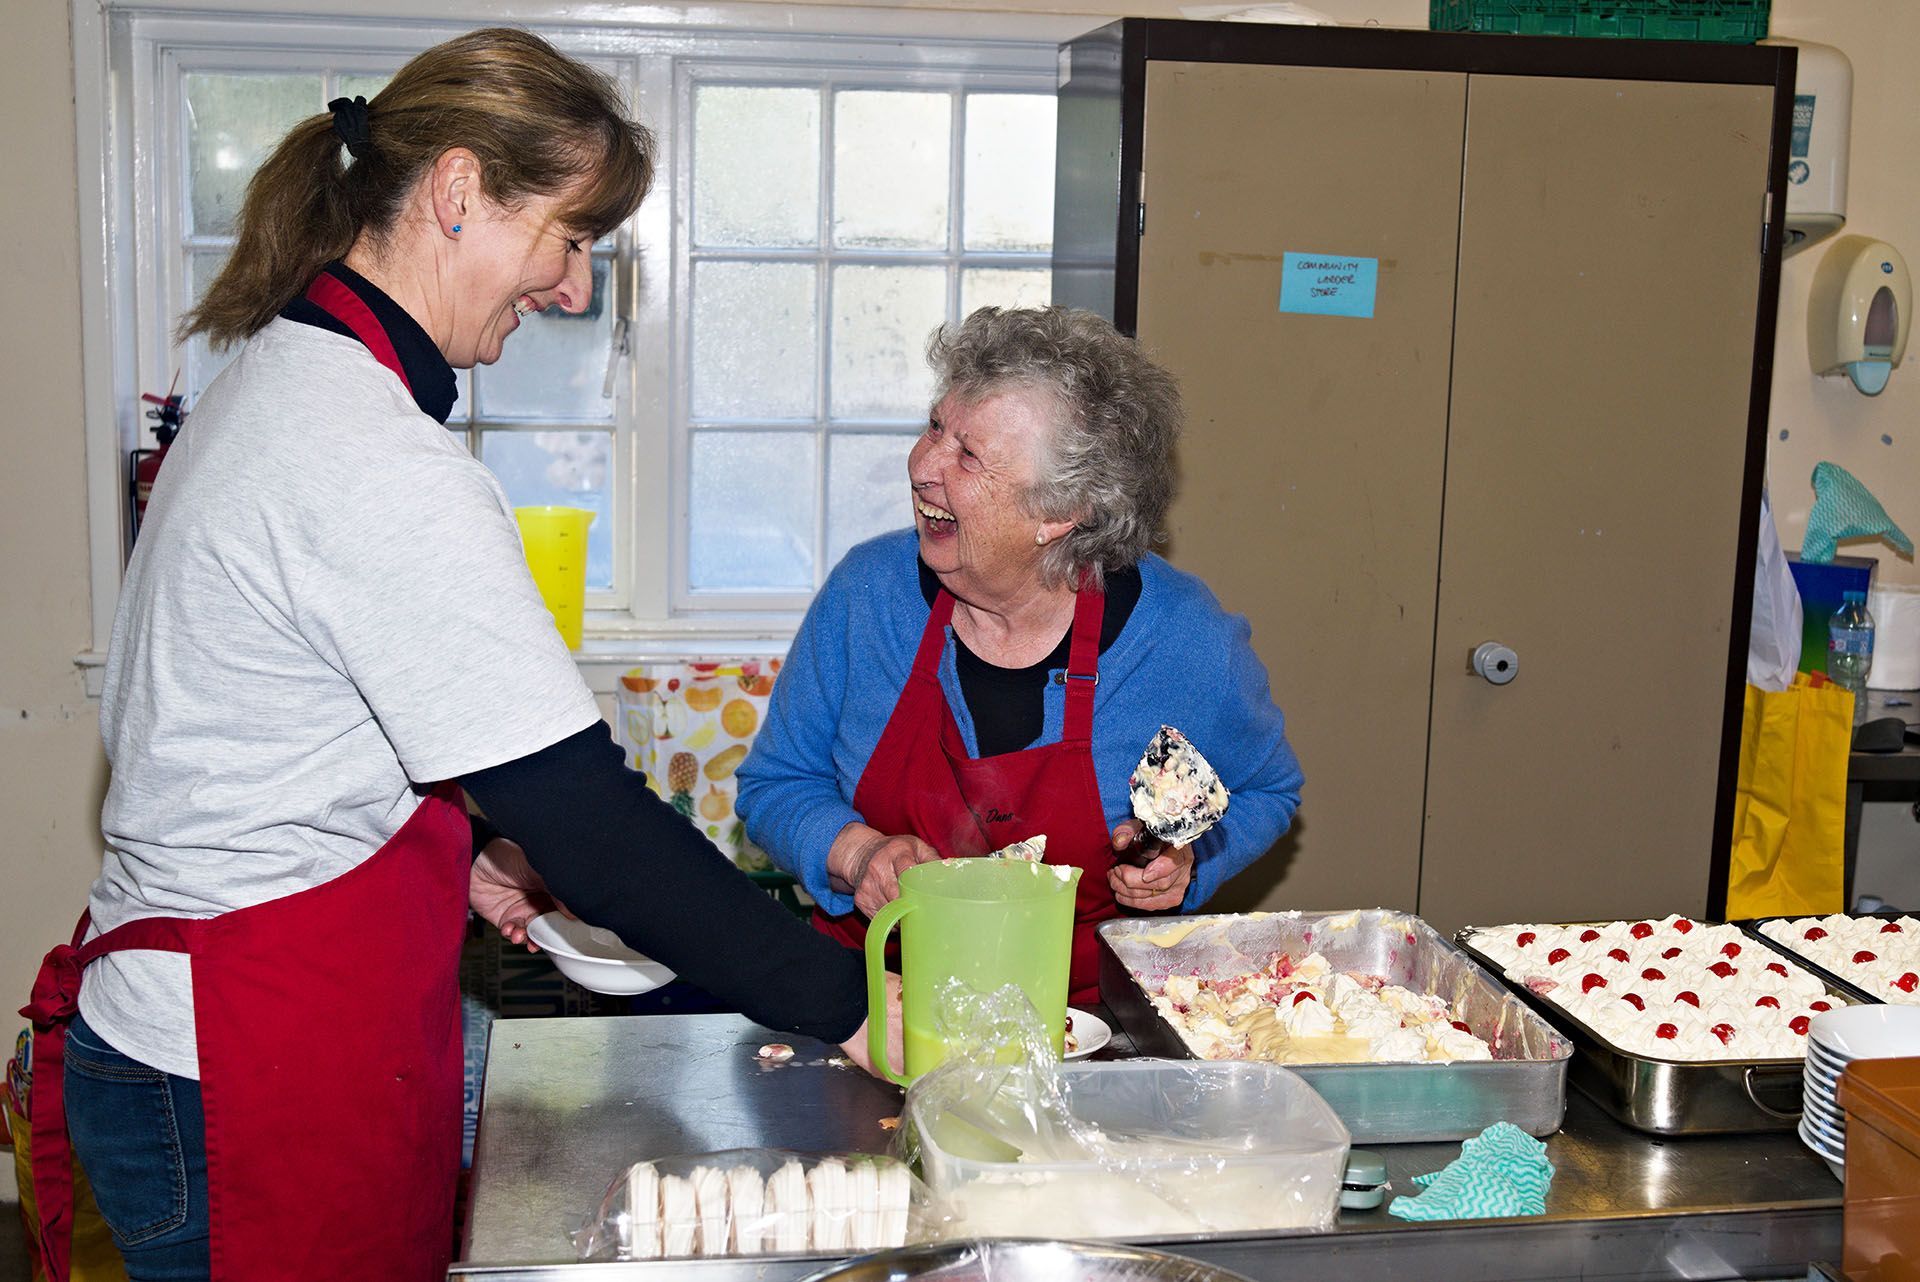 Two women at a Big Lunch at Christmas prepare trifle for the community. They're laughing and look full of Christmas spirit.